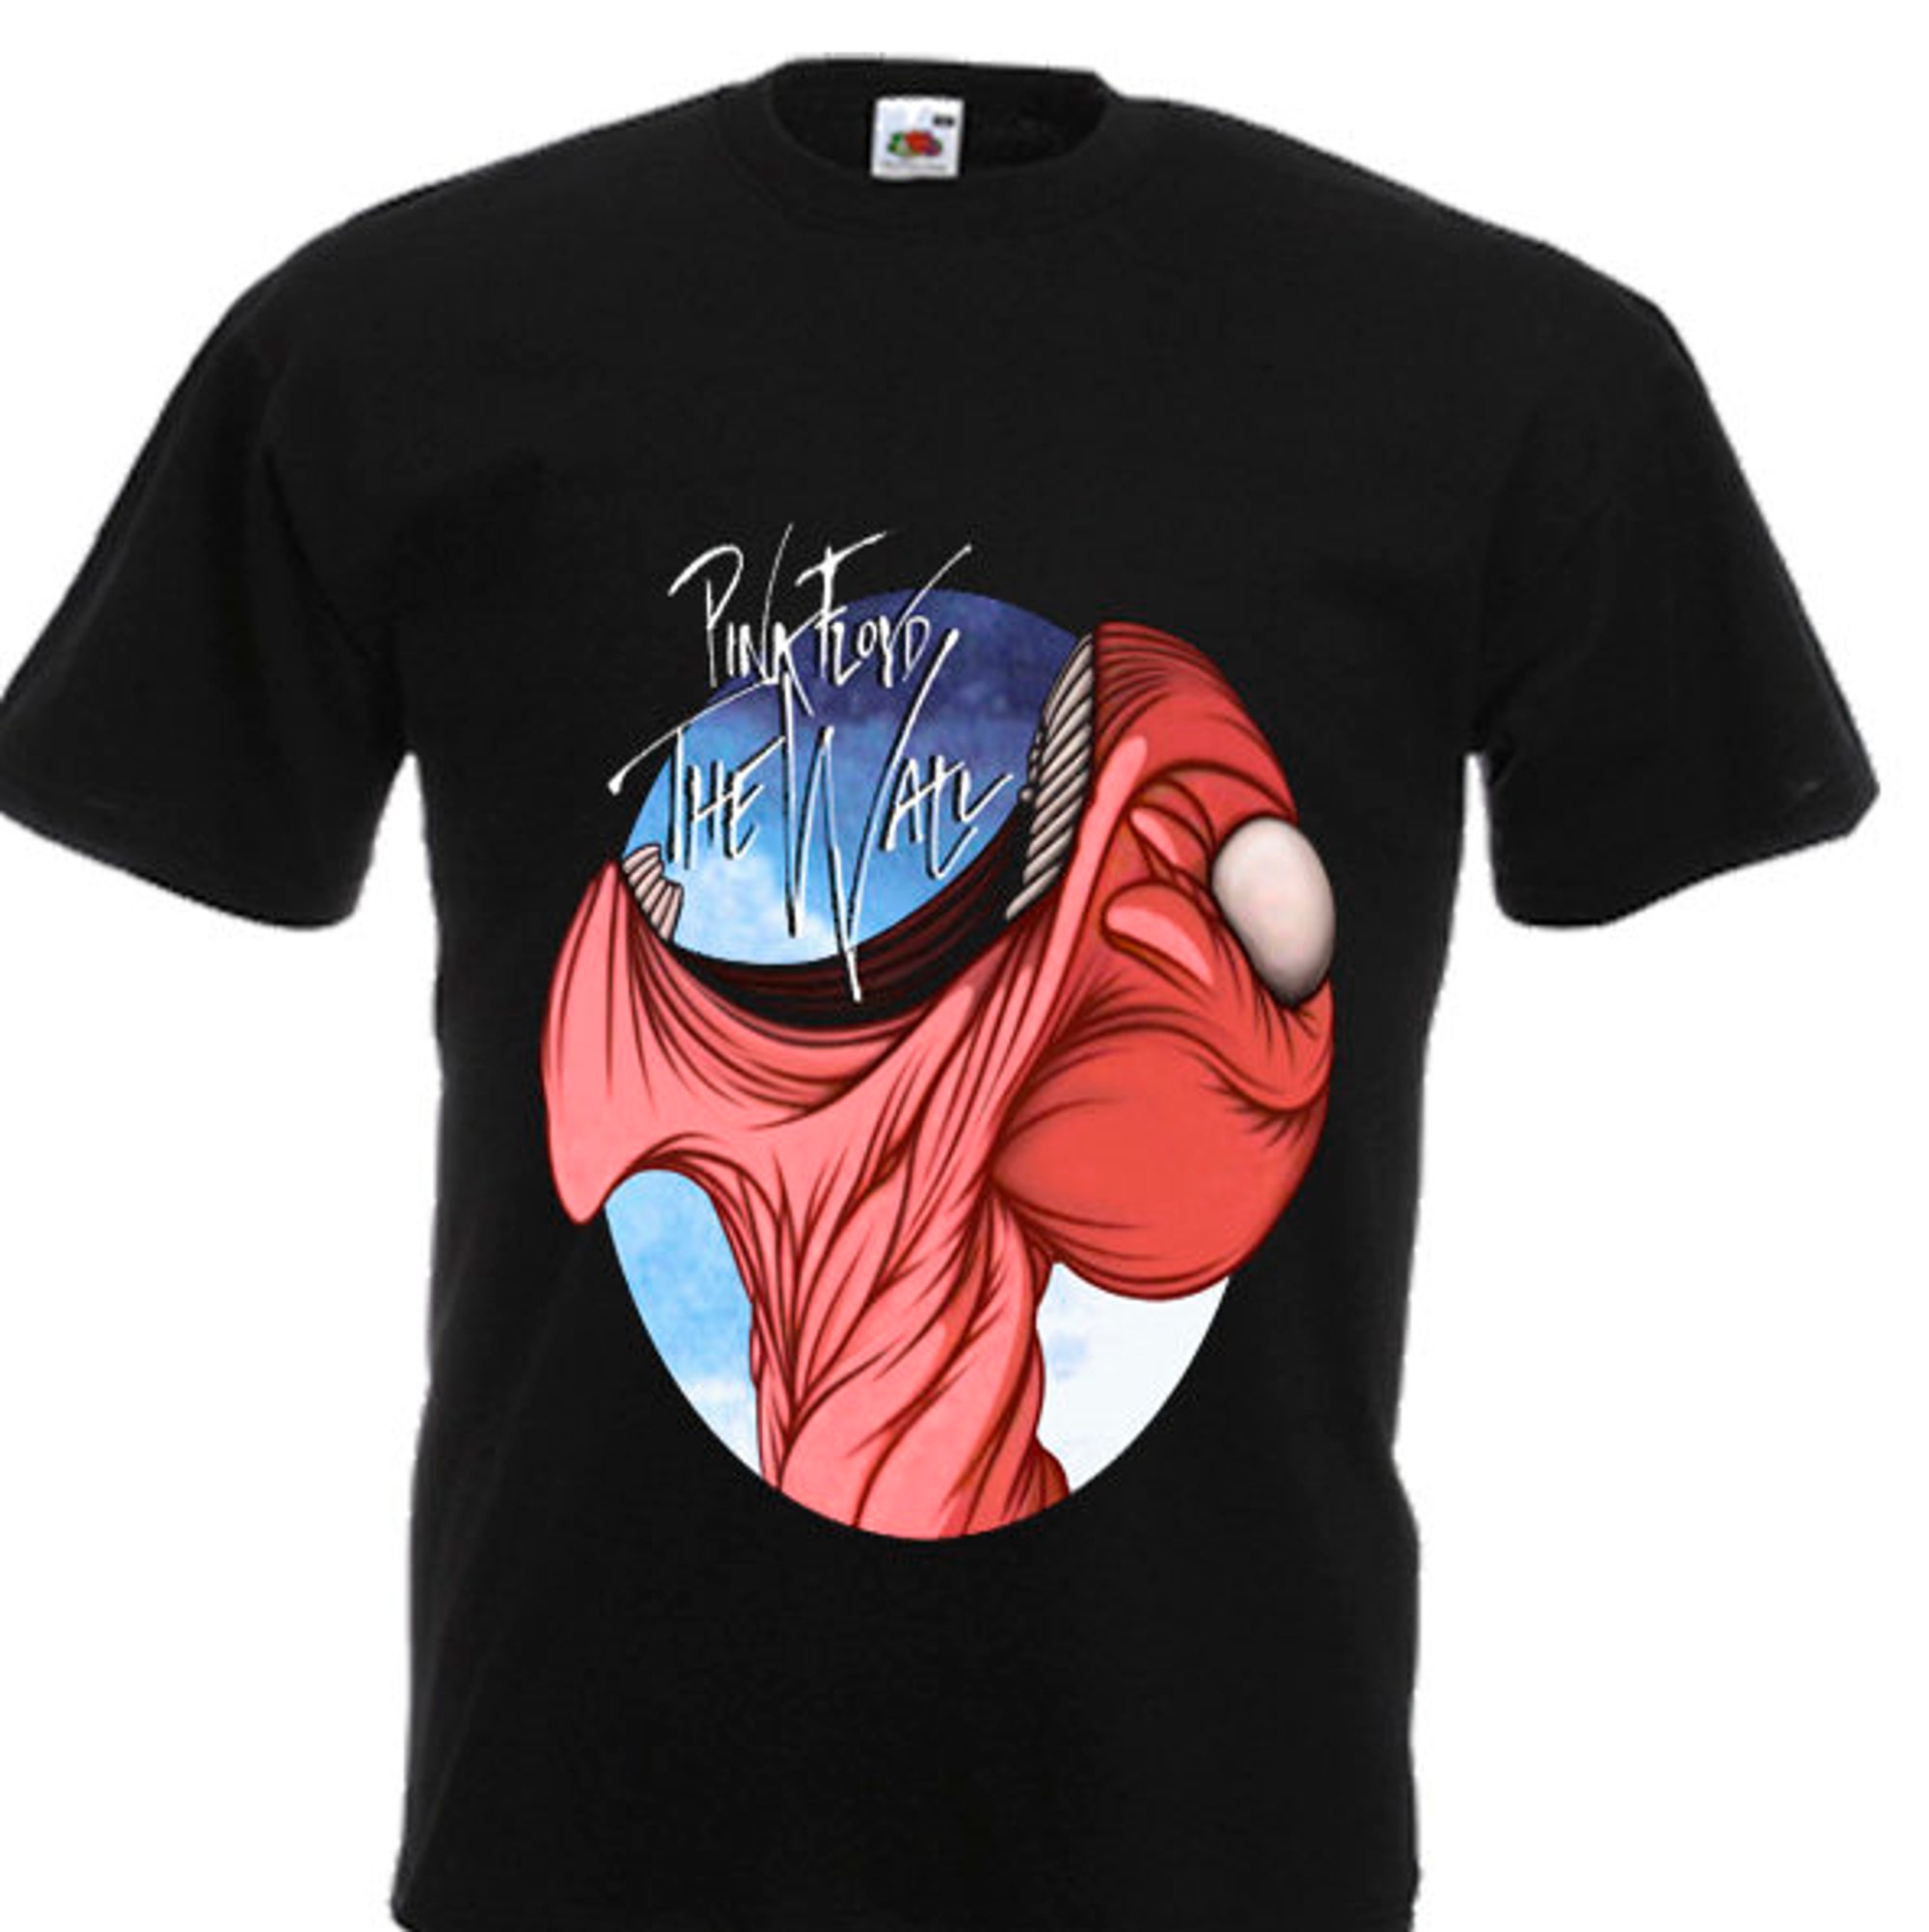 PINK FLOYD -Roger Waters - The Wall t-shirt